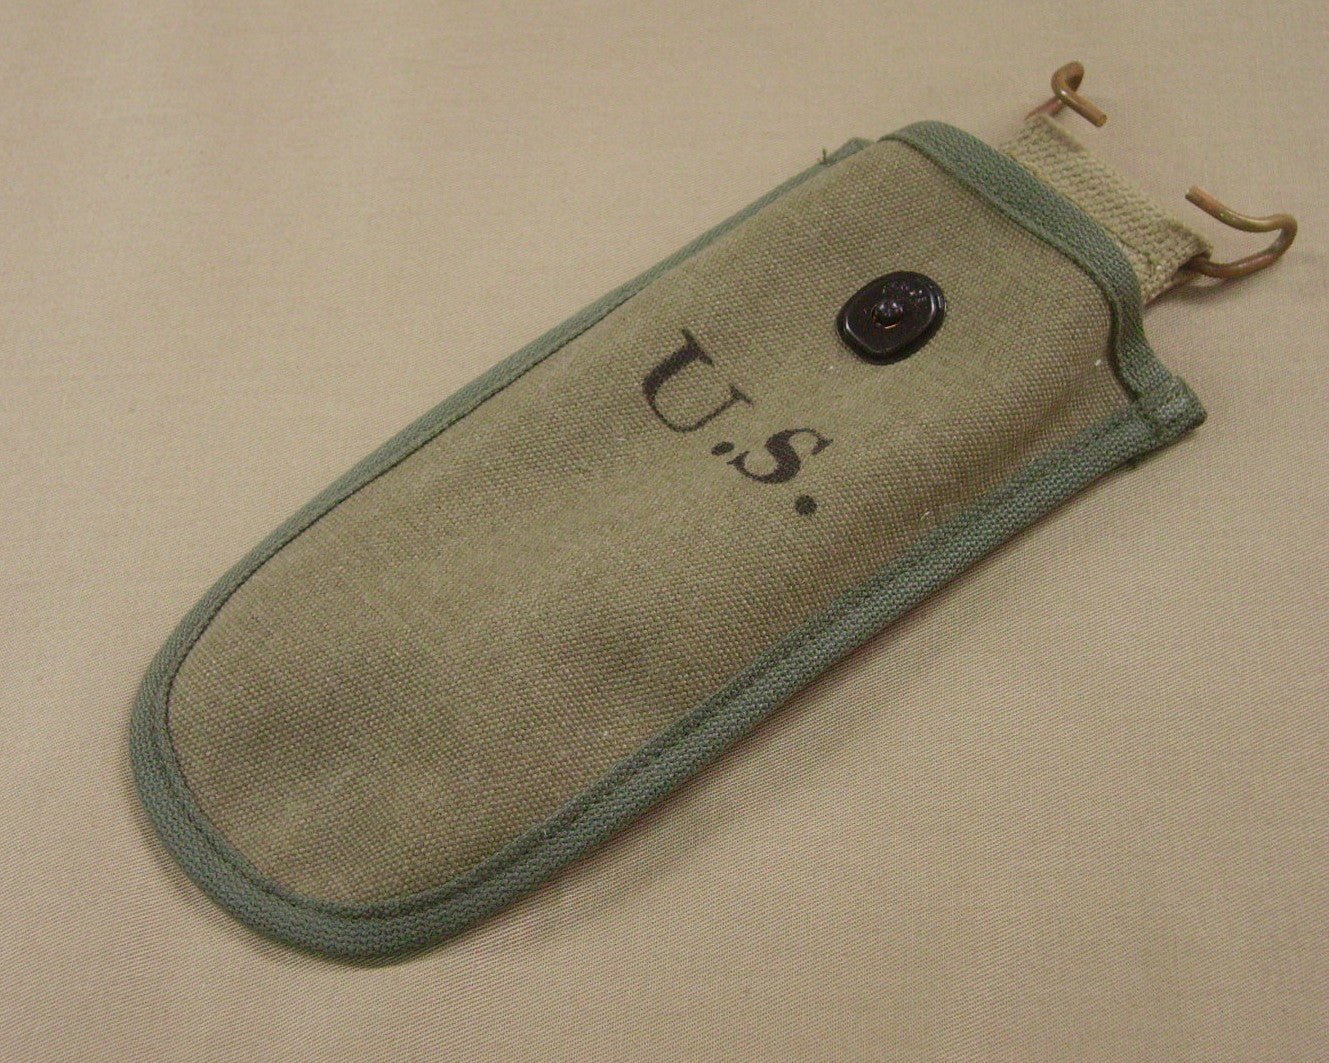 Pouch, Wire Cutter, Army